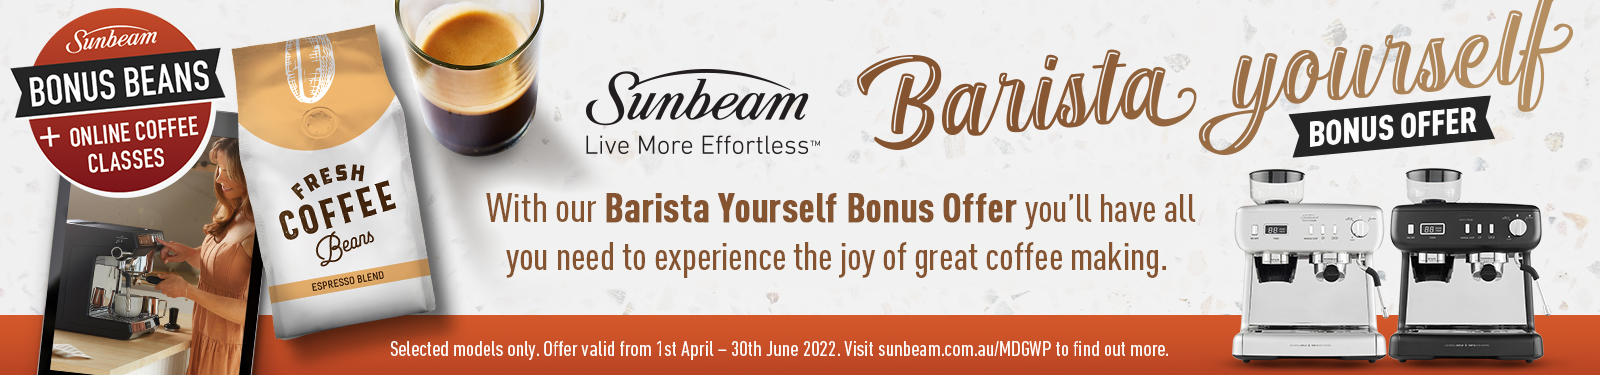 Bonus Coffee Beans & Online Class with selected Sunbeam Coffee Machines at Retravision